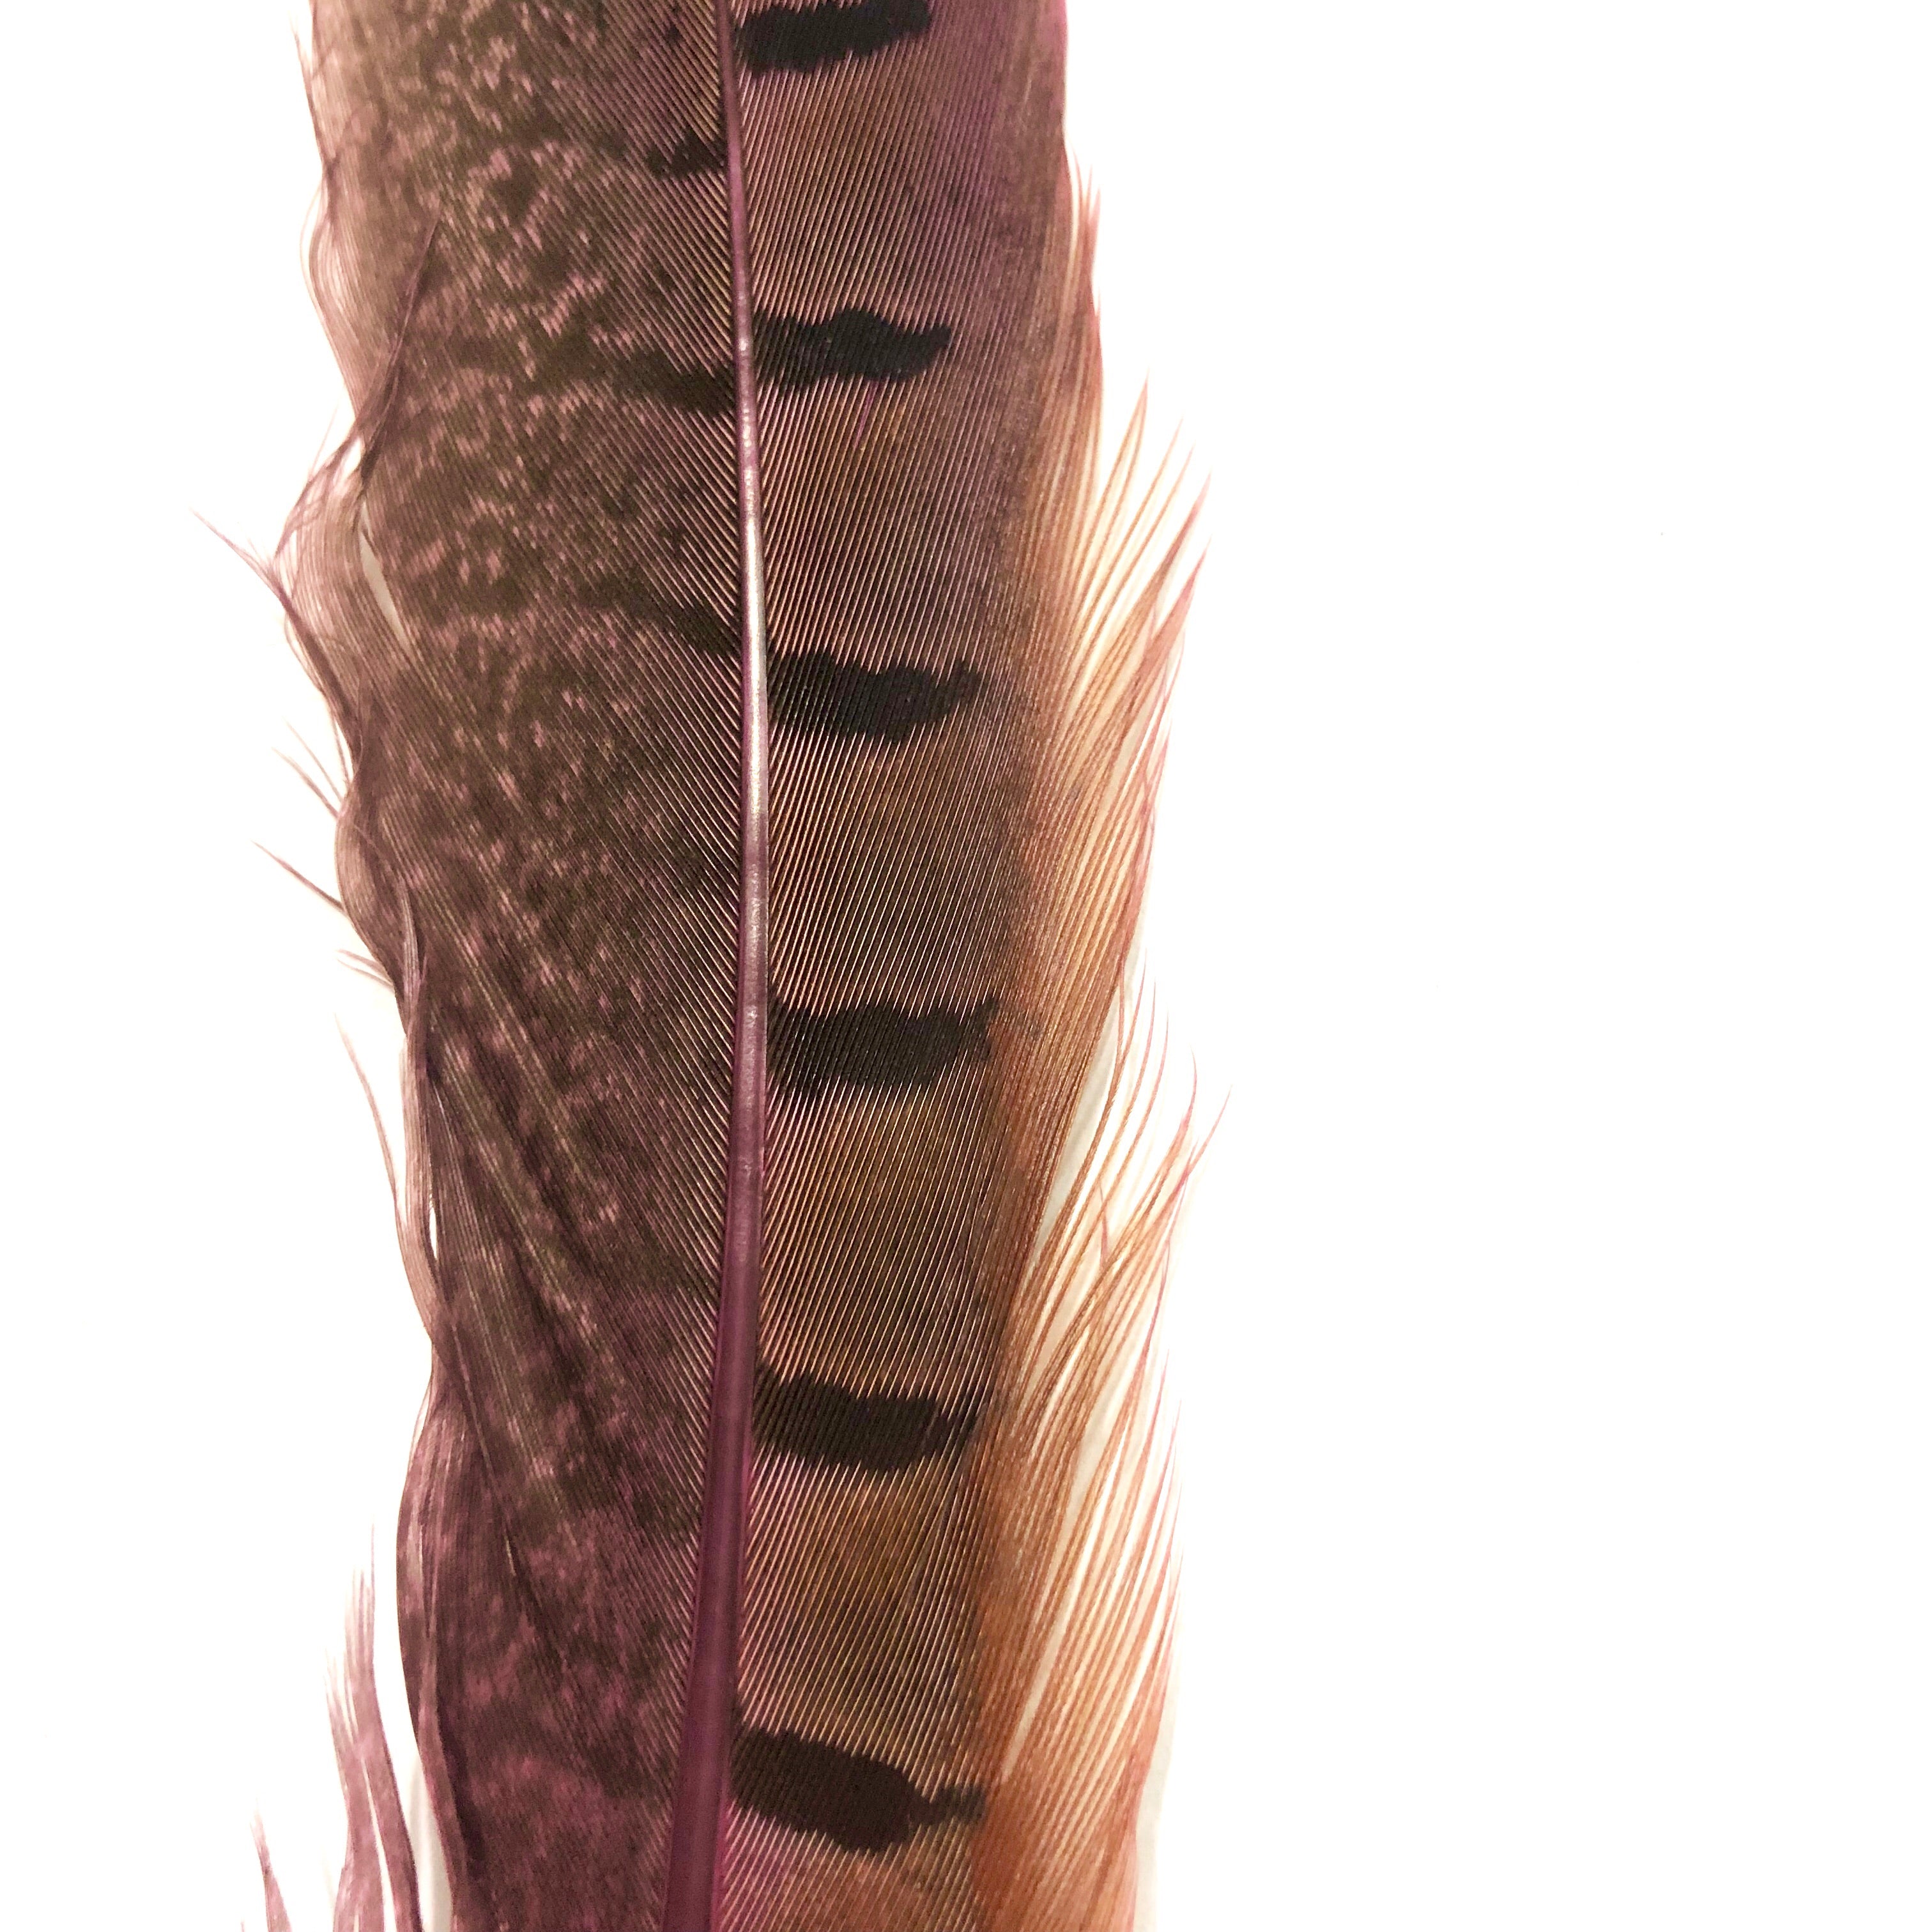 6" to 10" Ringneck Pheasant Tail Feather x 10 pcs - Hot Pink